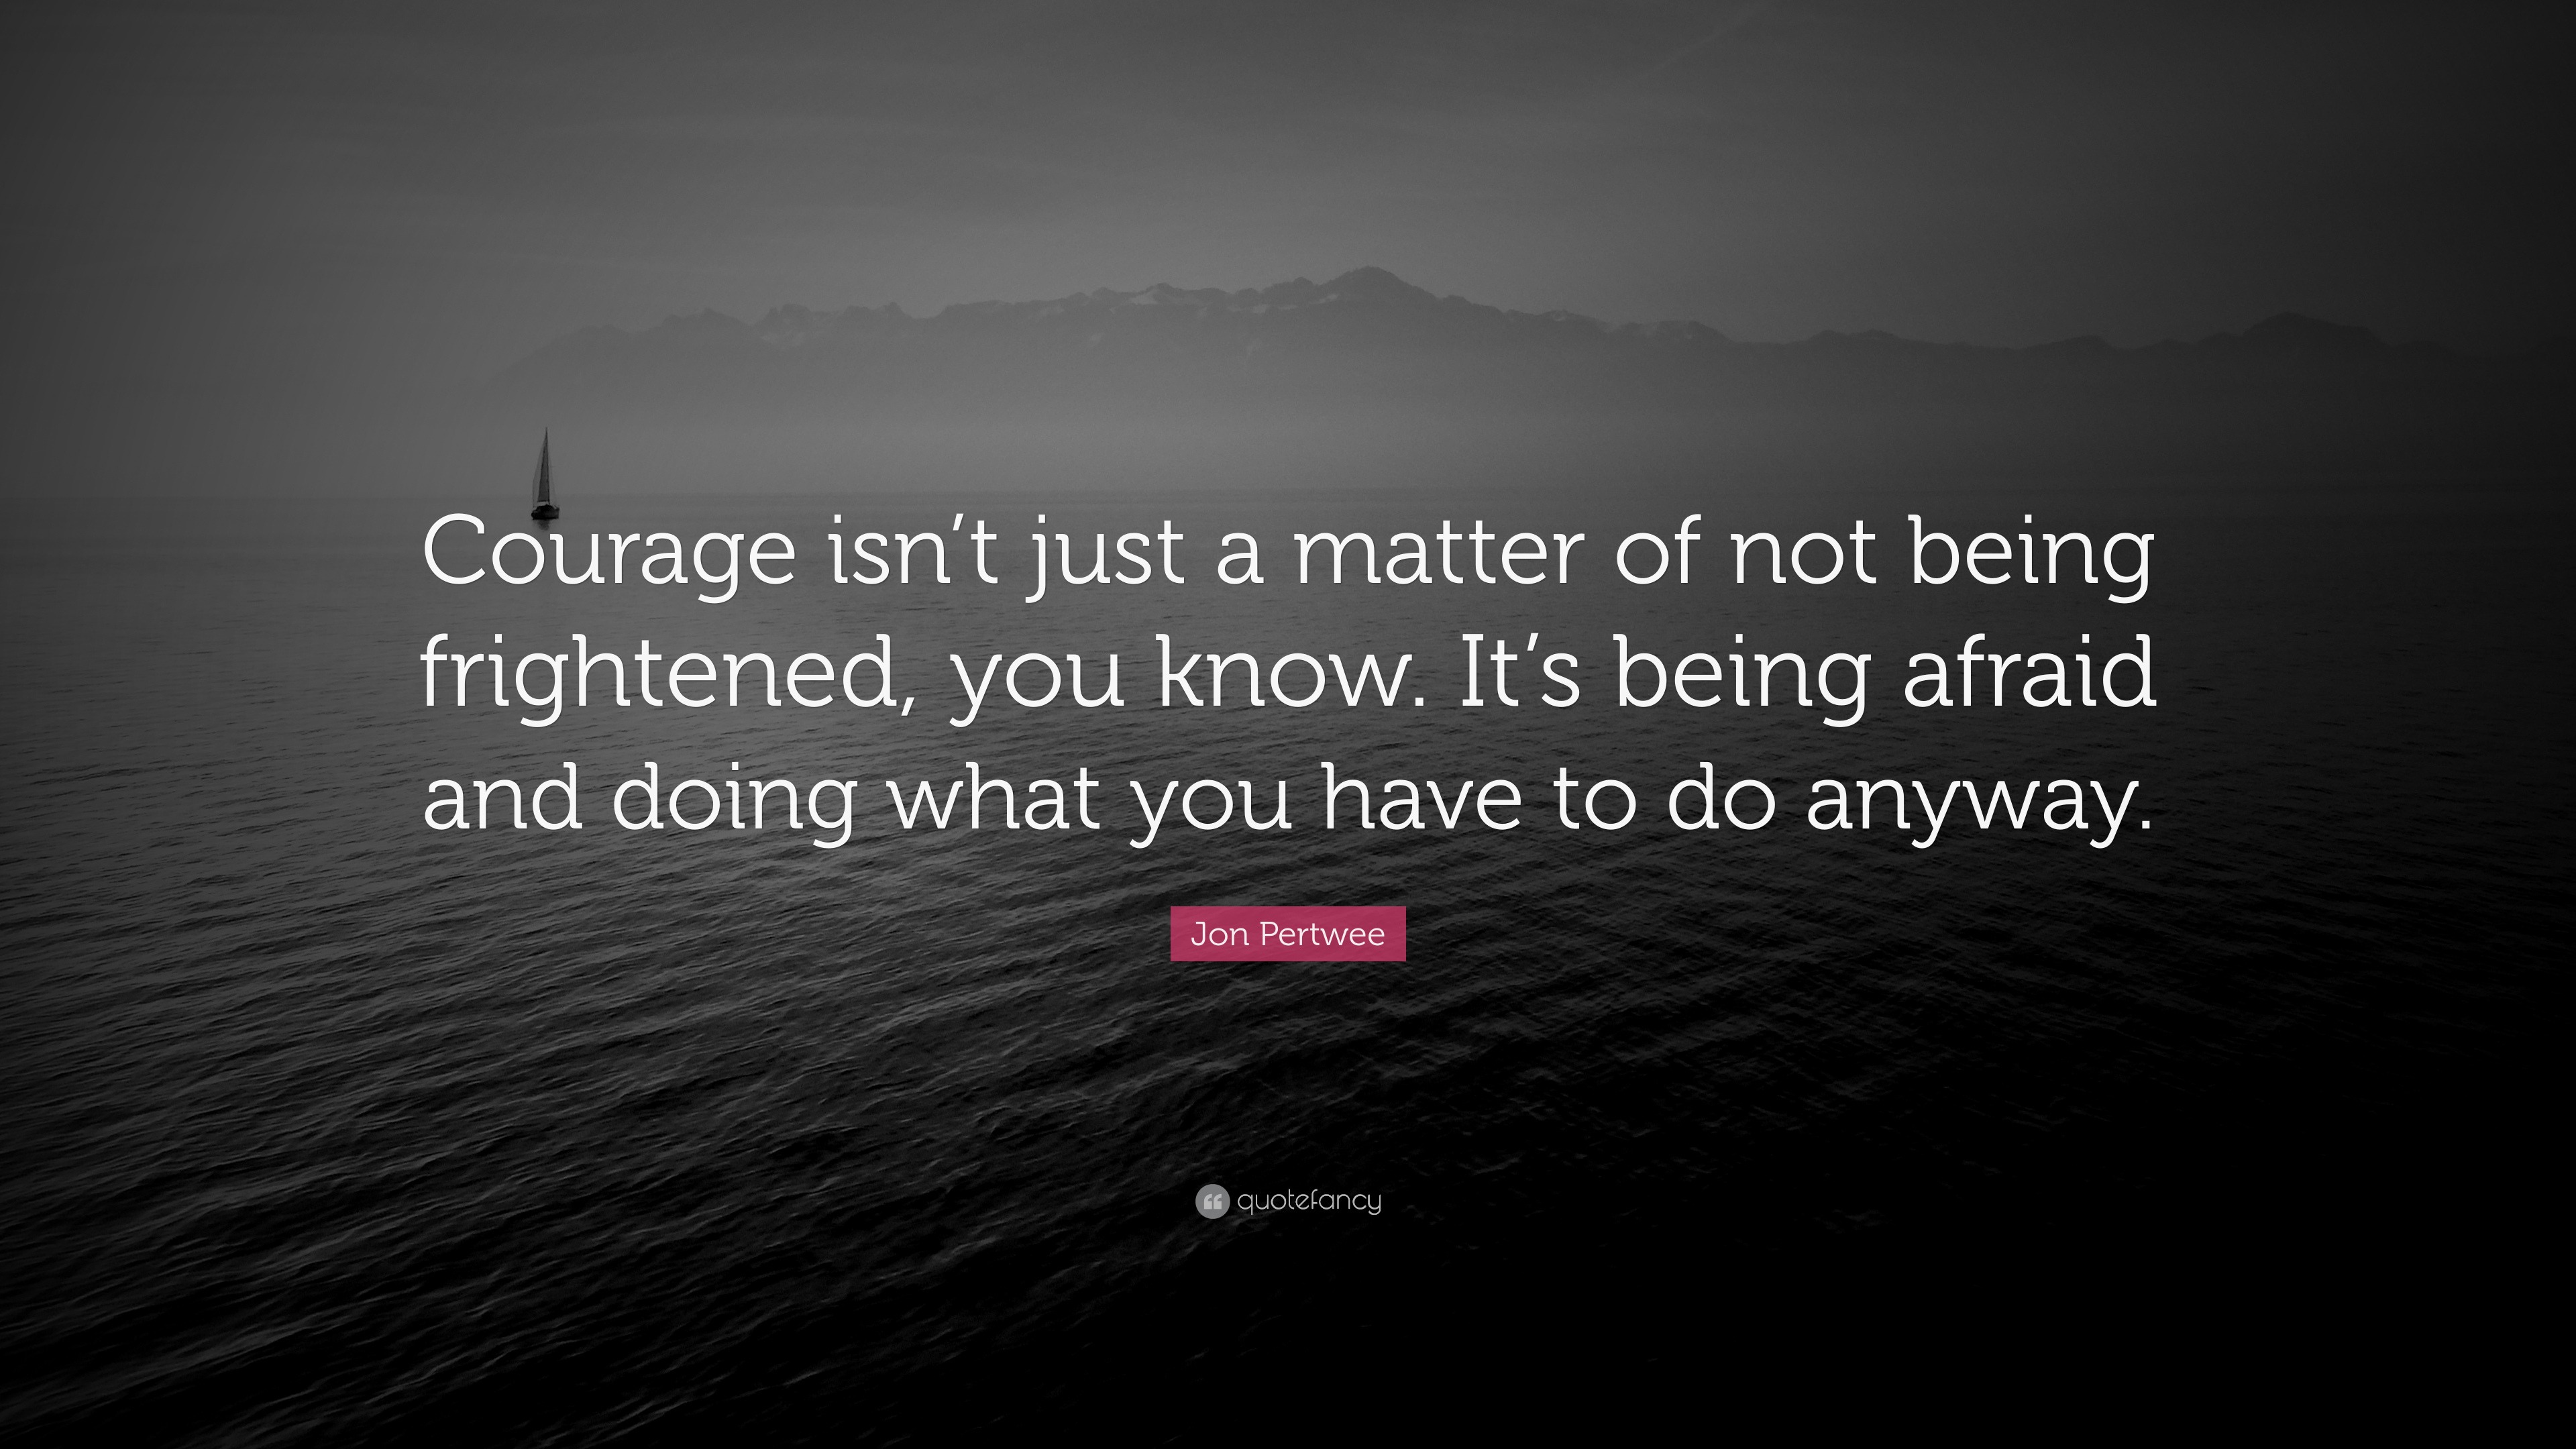 Jon Pertwee Quote: “Courage isn’t just a matter of not being frightened ...